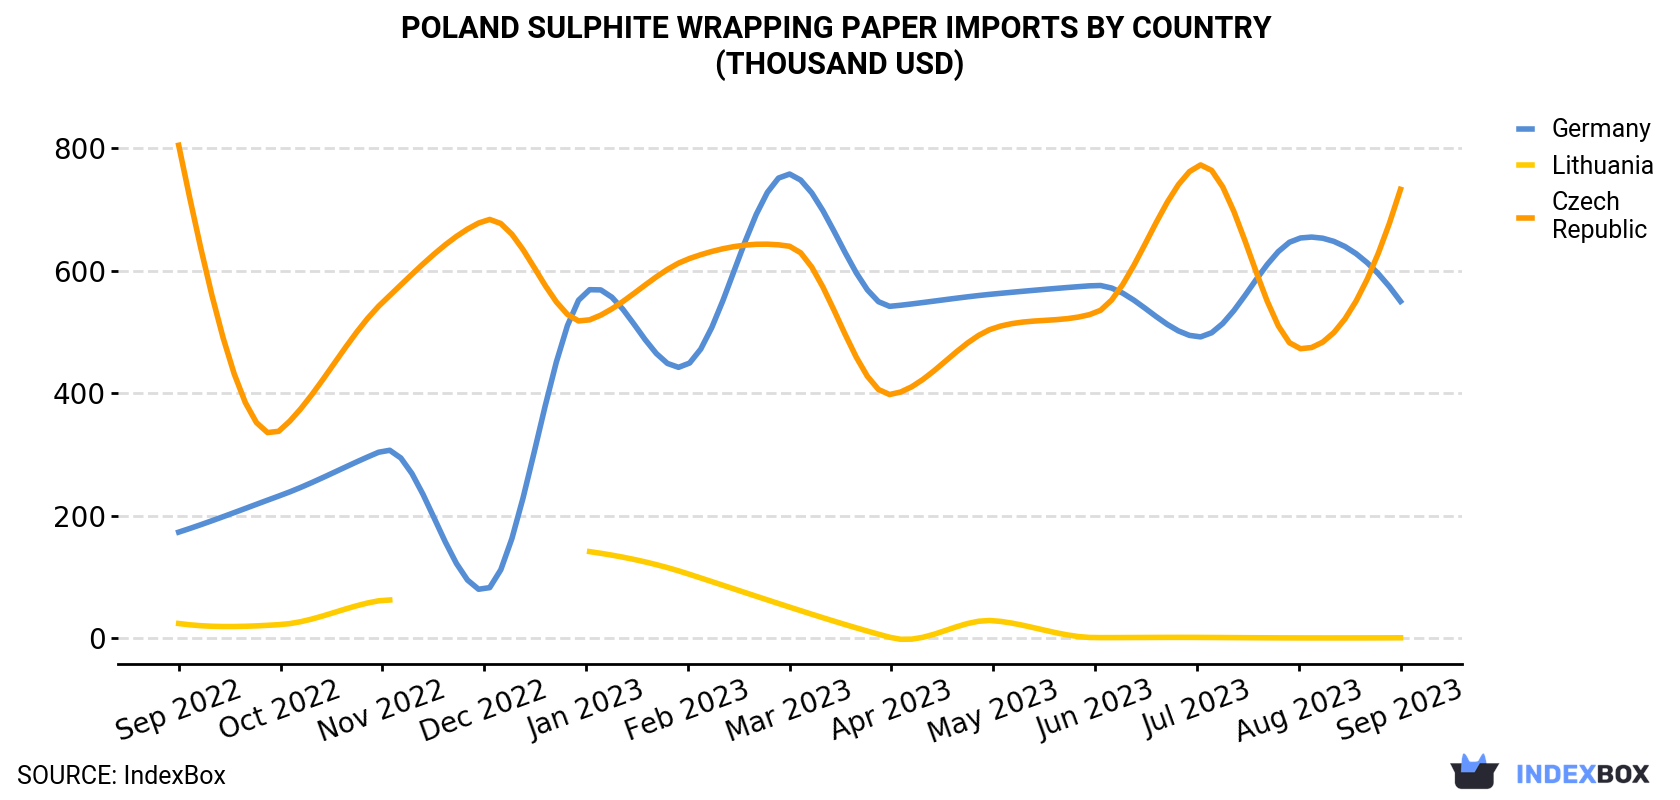 Poland Sulphite Wrapping Paper Imports By Country (Thousand USD)